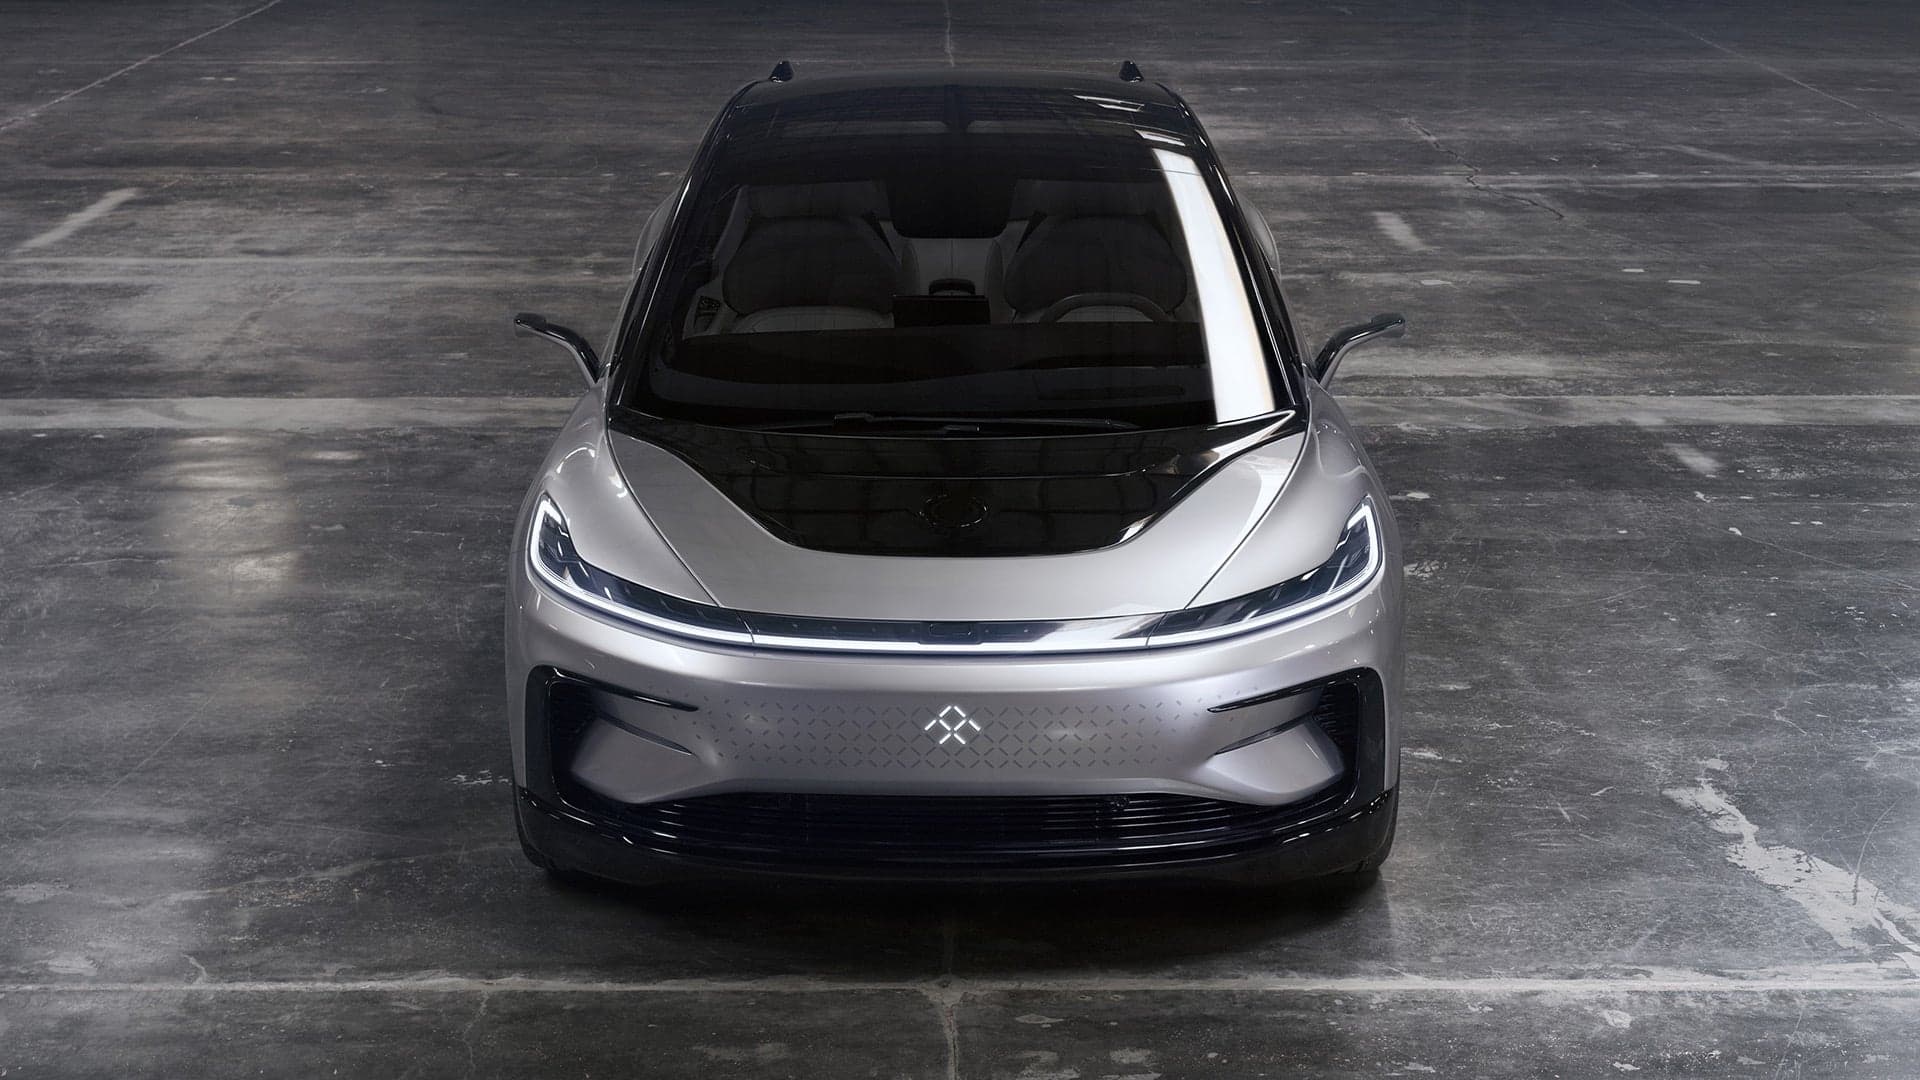 Faraday Future’s Financial Woes Continue, More Layoffs Expected This Week